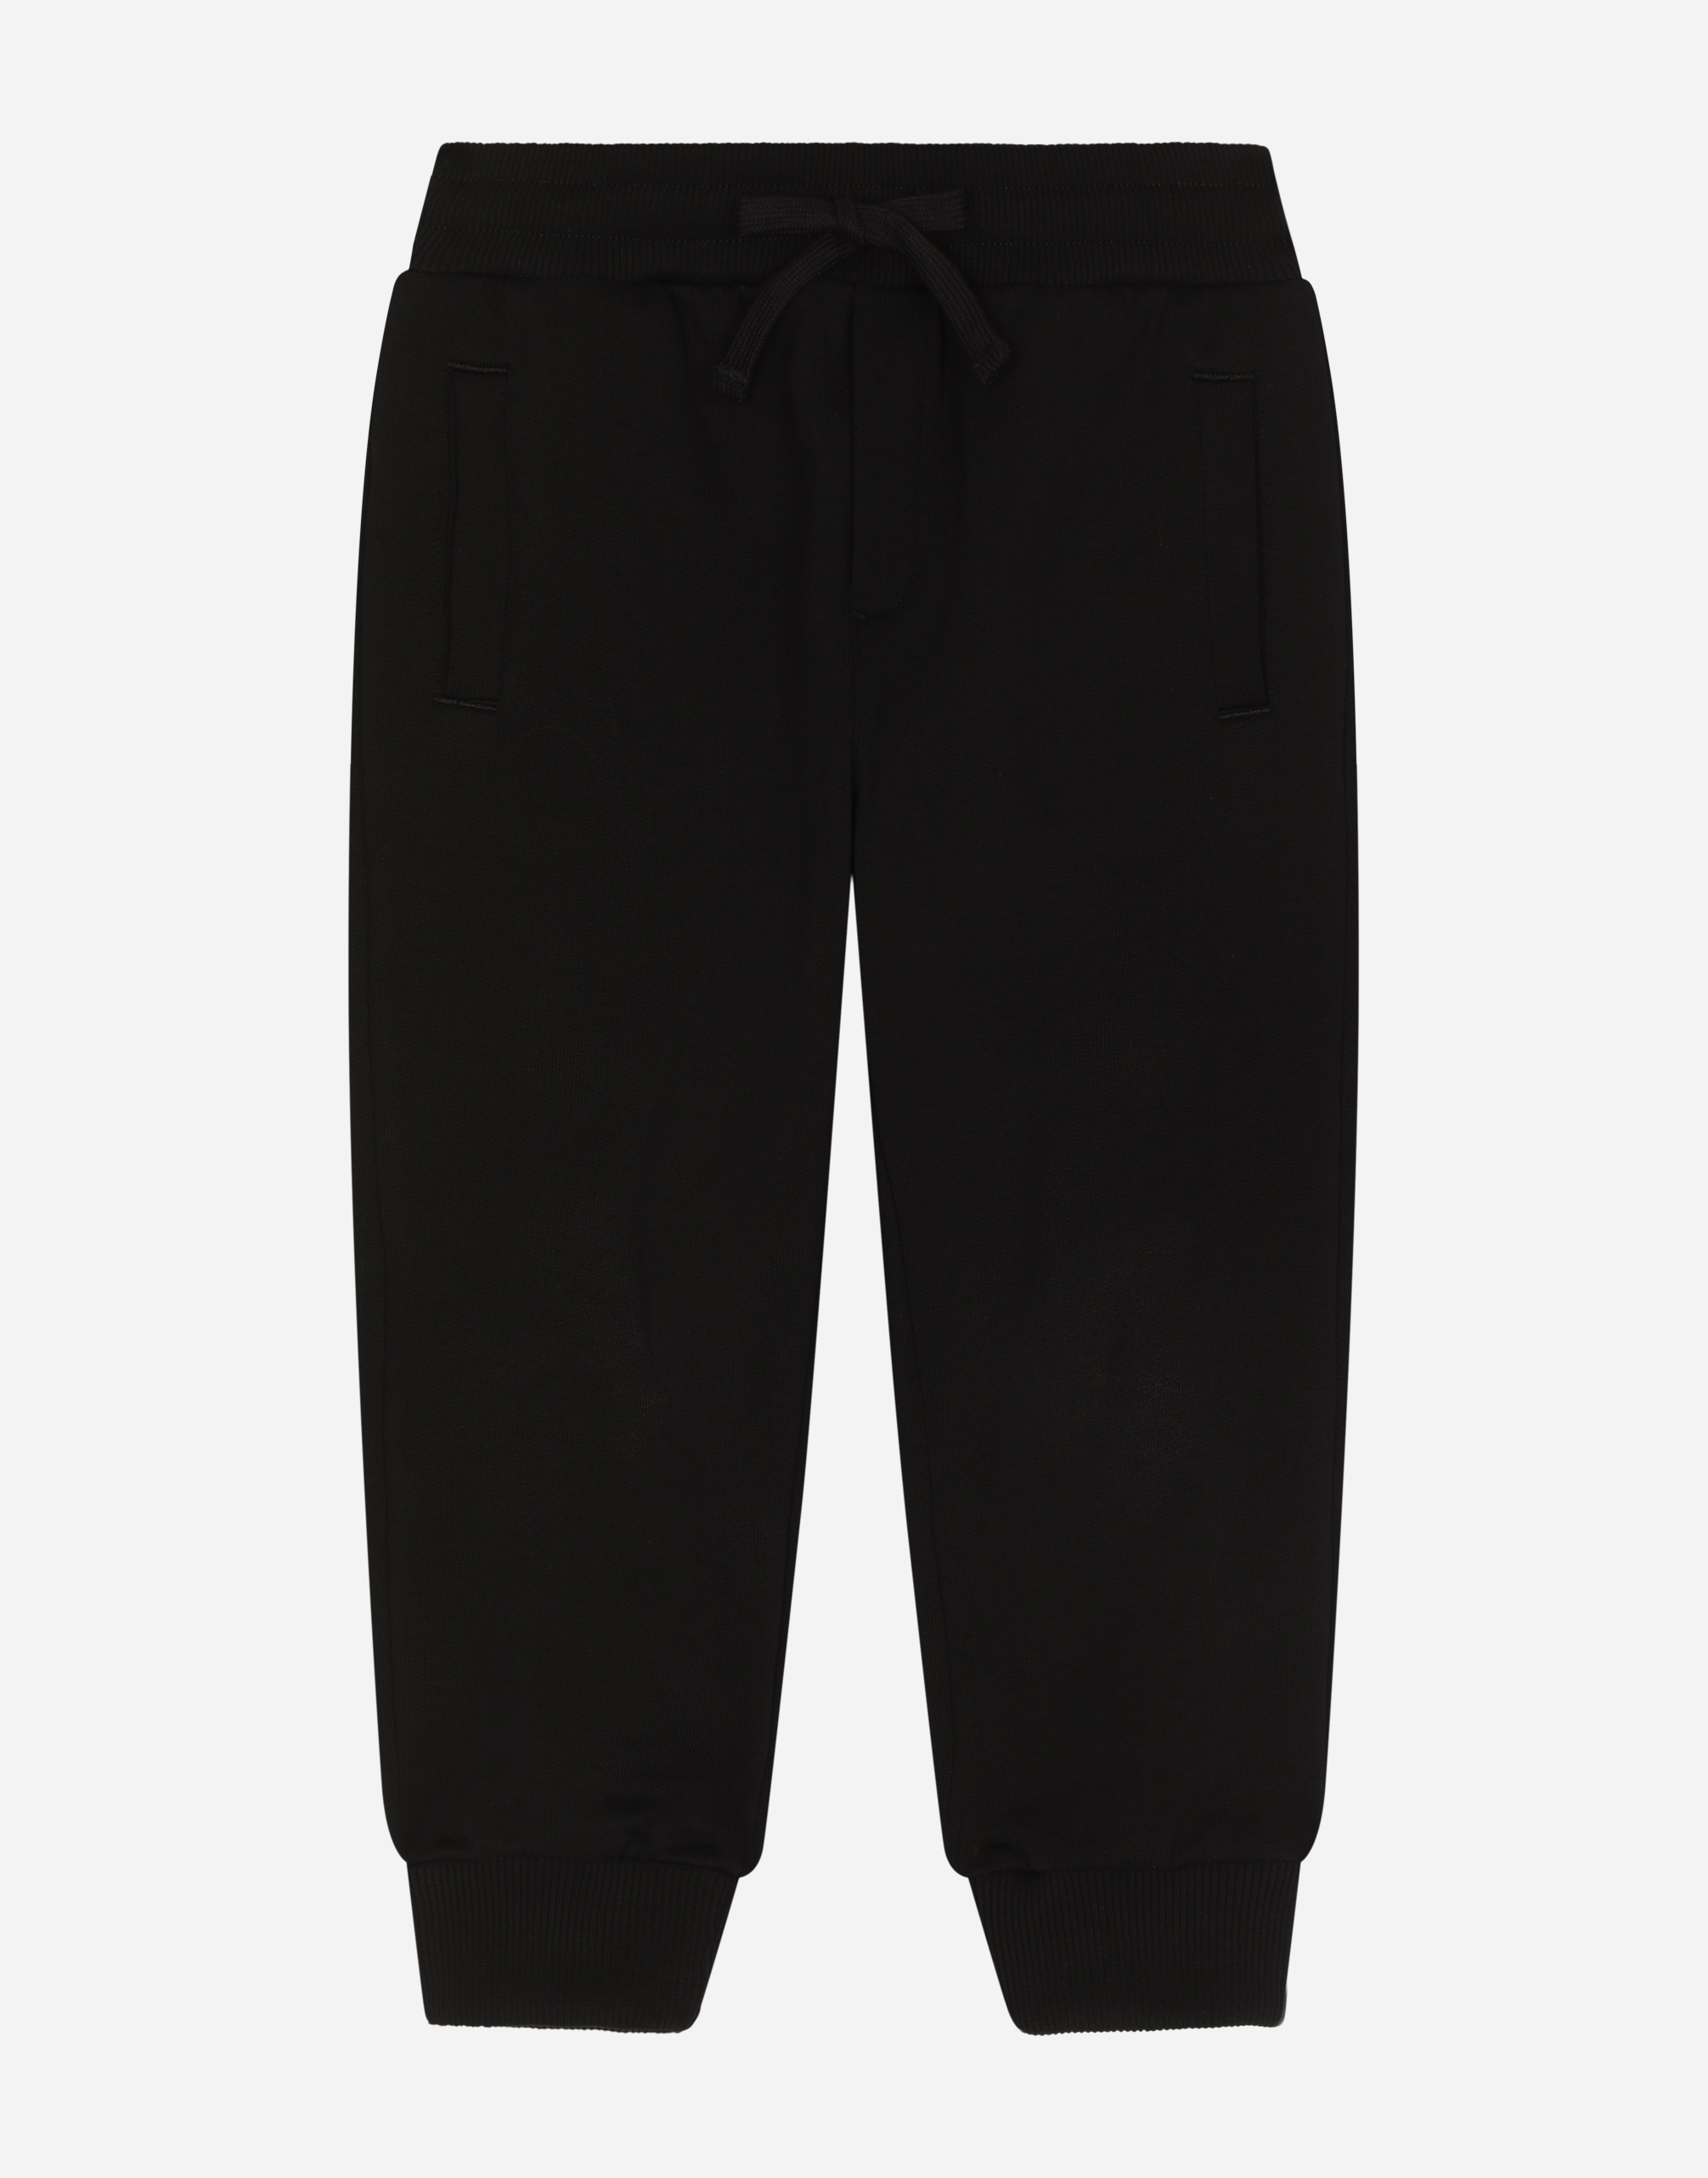 Jogging pants with Gianpiero D’Alessandro print in Black